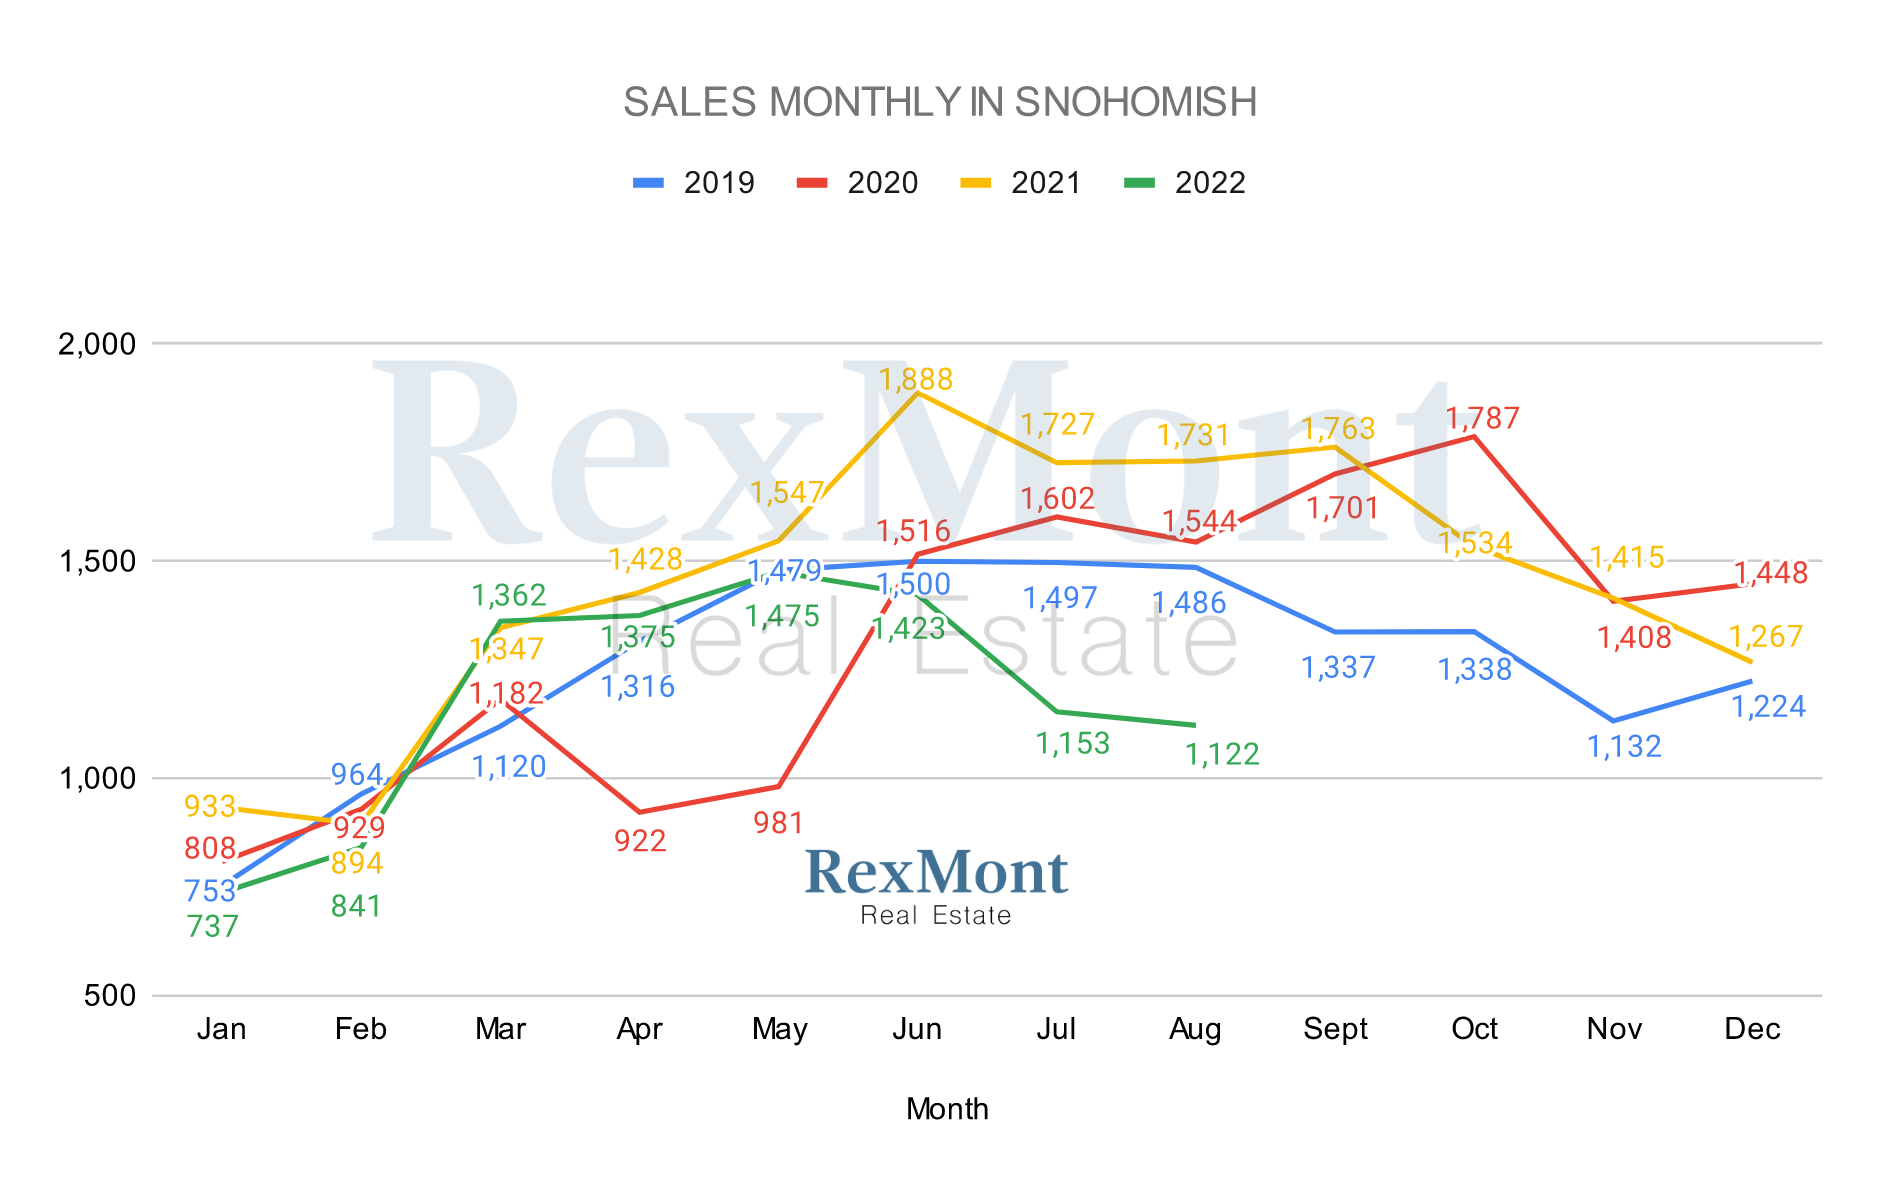 Graph of New Homes Sales By Month in Snohomish County